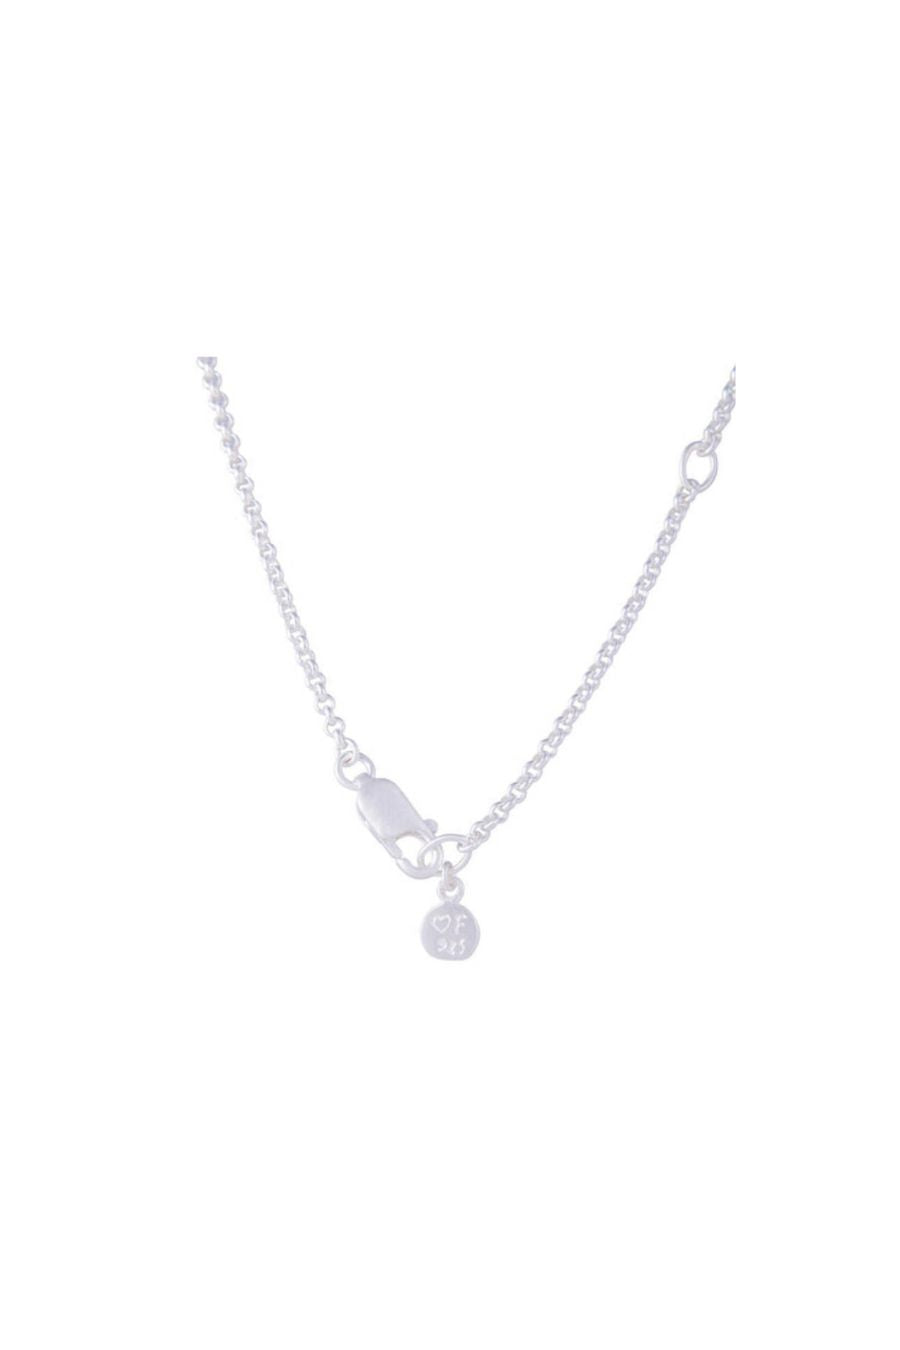 FAIRLEY Silver Keshi Pearl Necklace